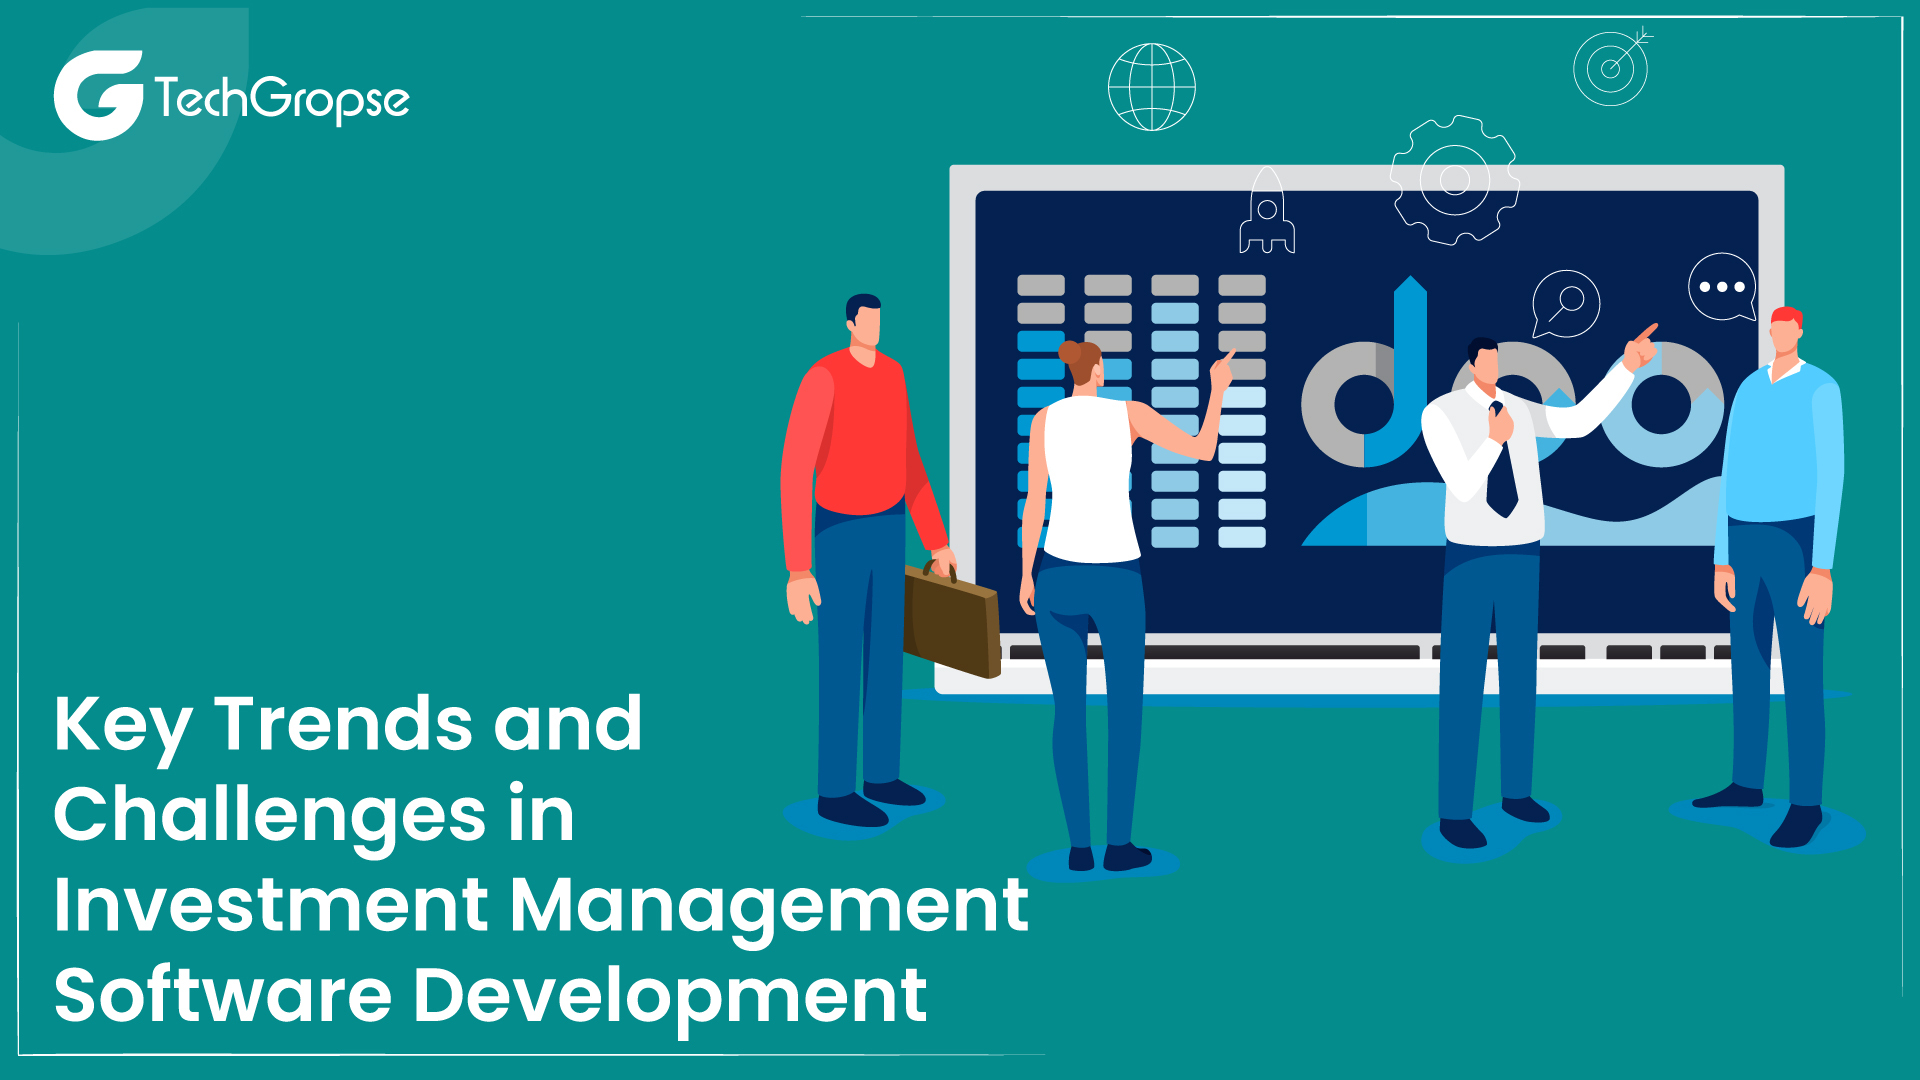 Key Trends and Challenges in Investment Management Software Development